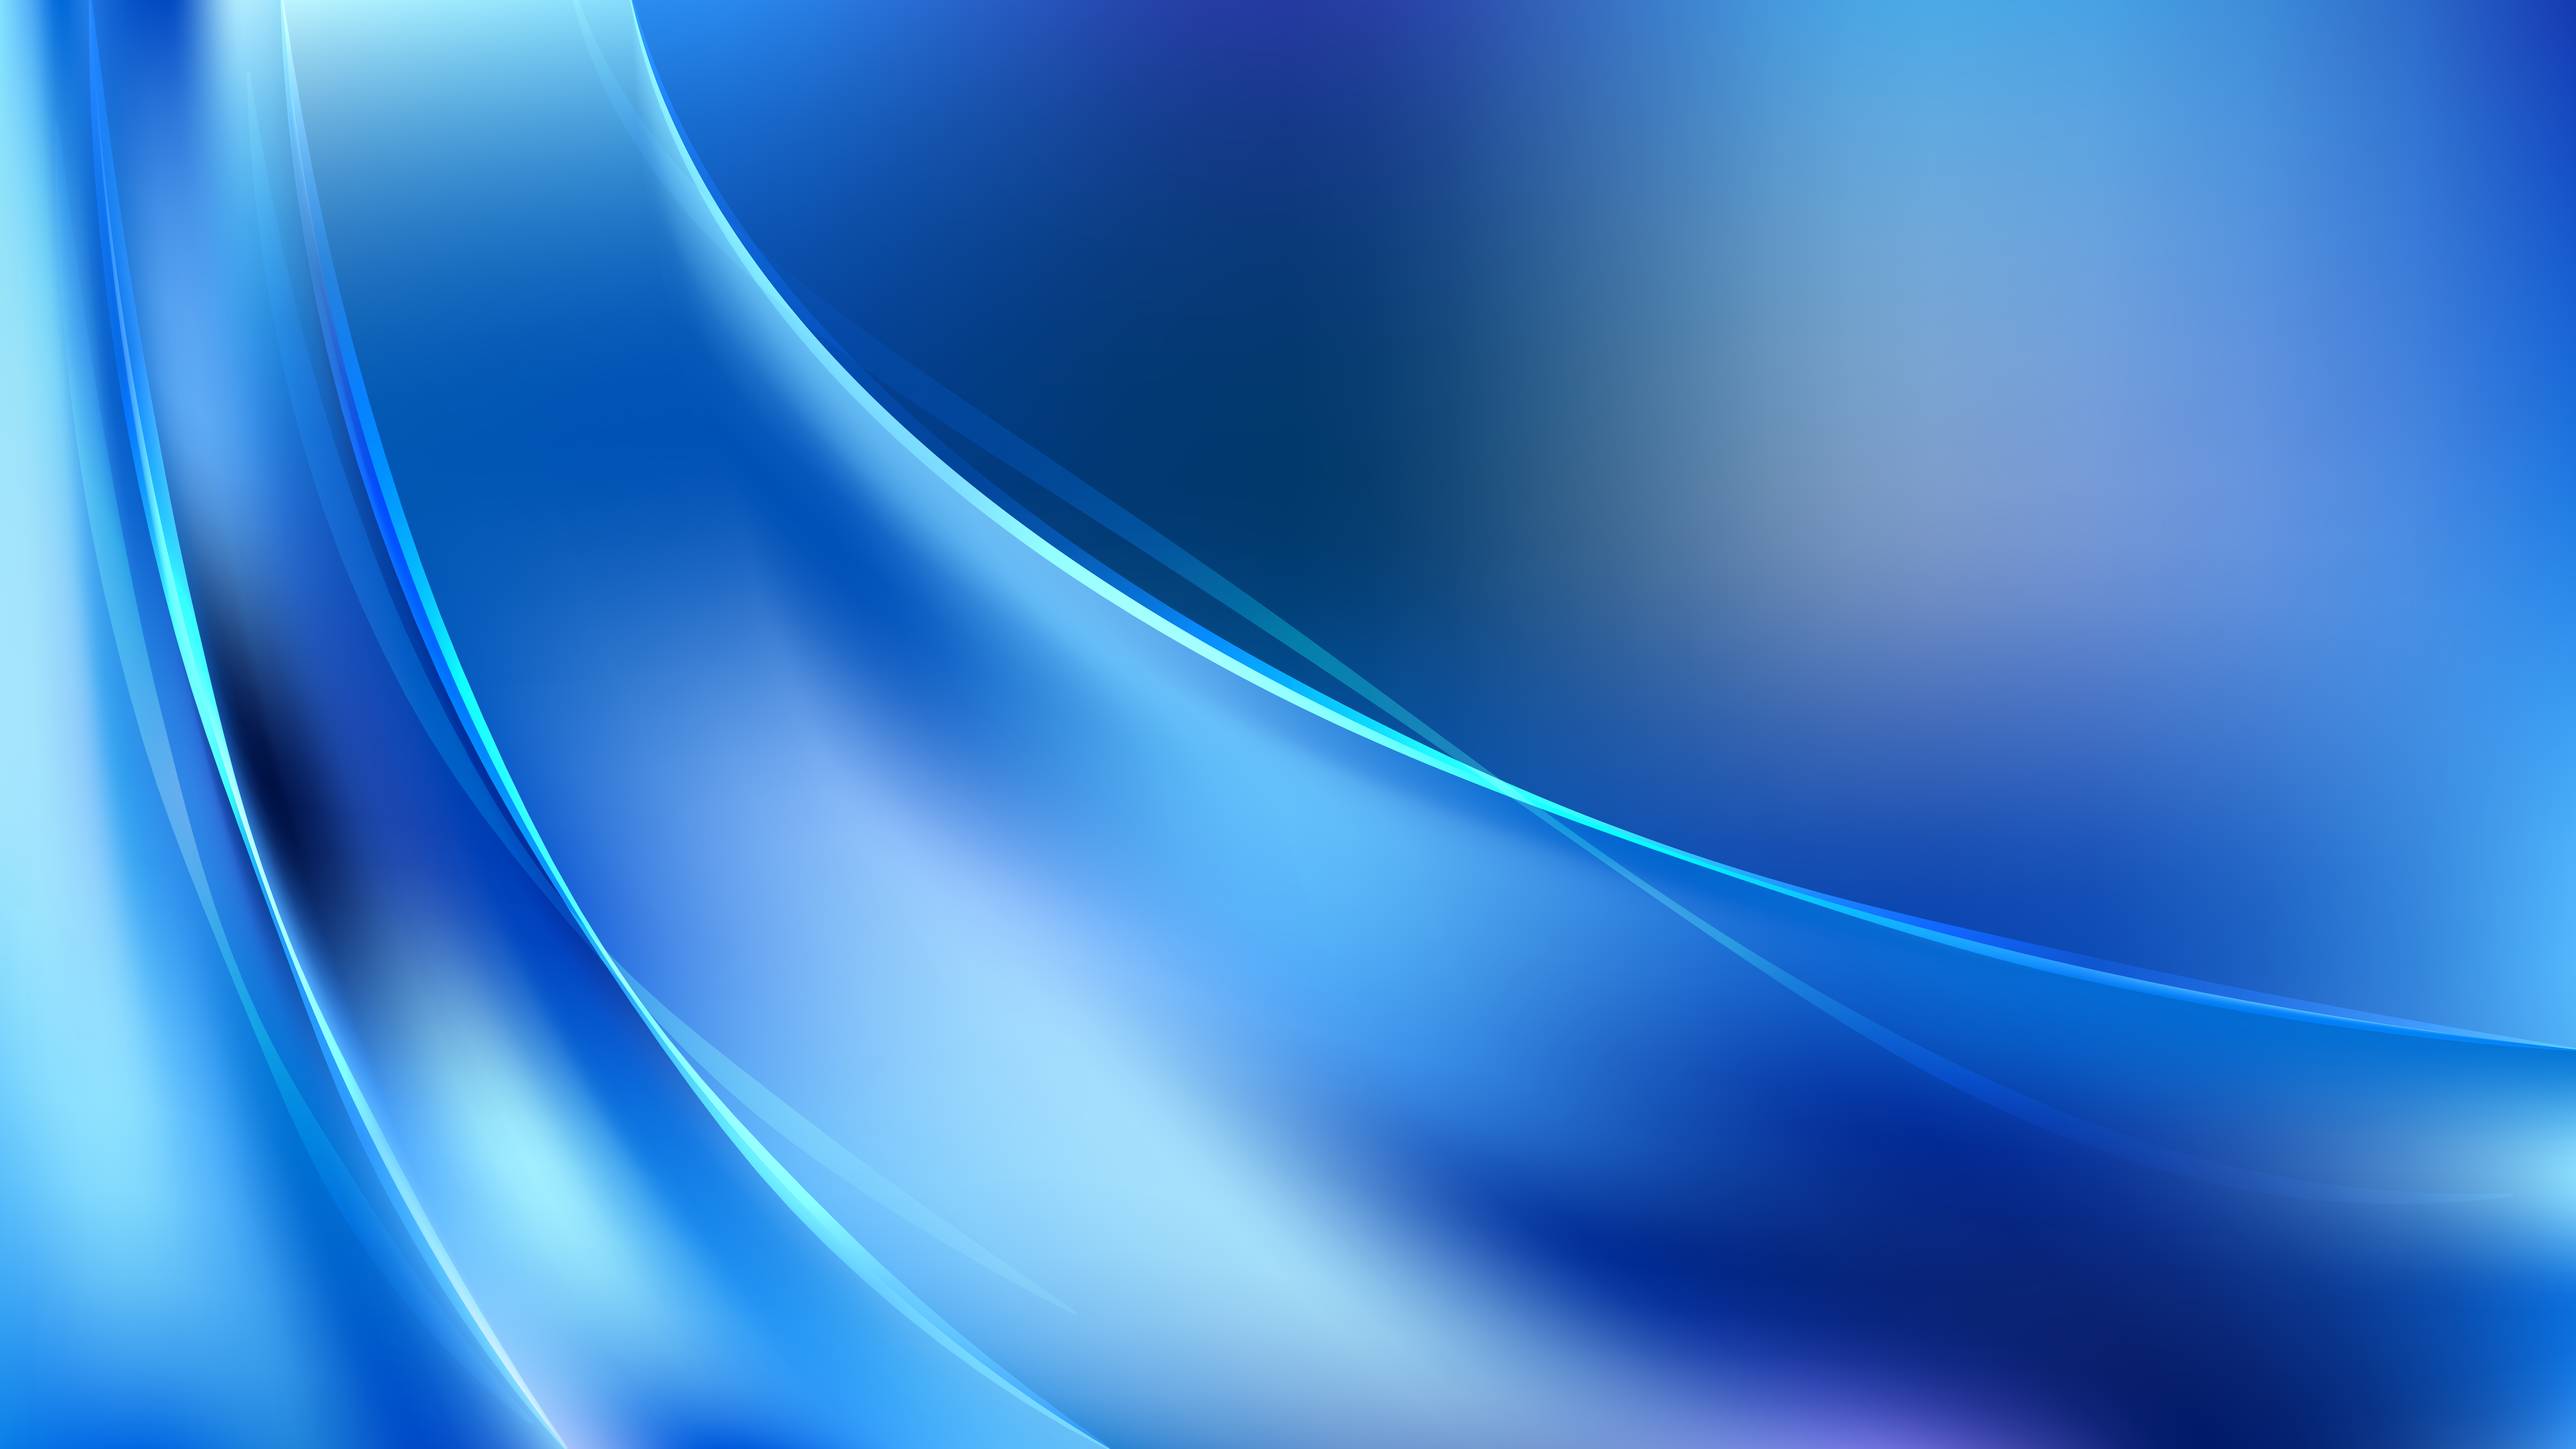 Free Abstract Glowing Blue Wave Background Image